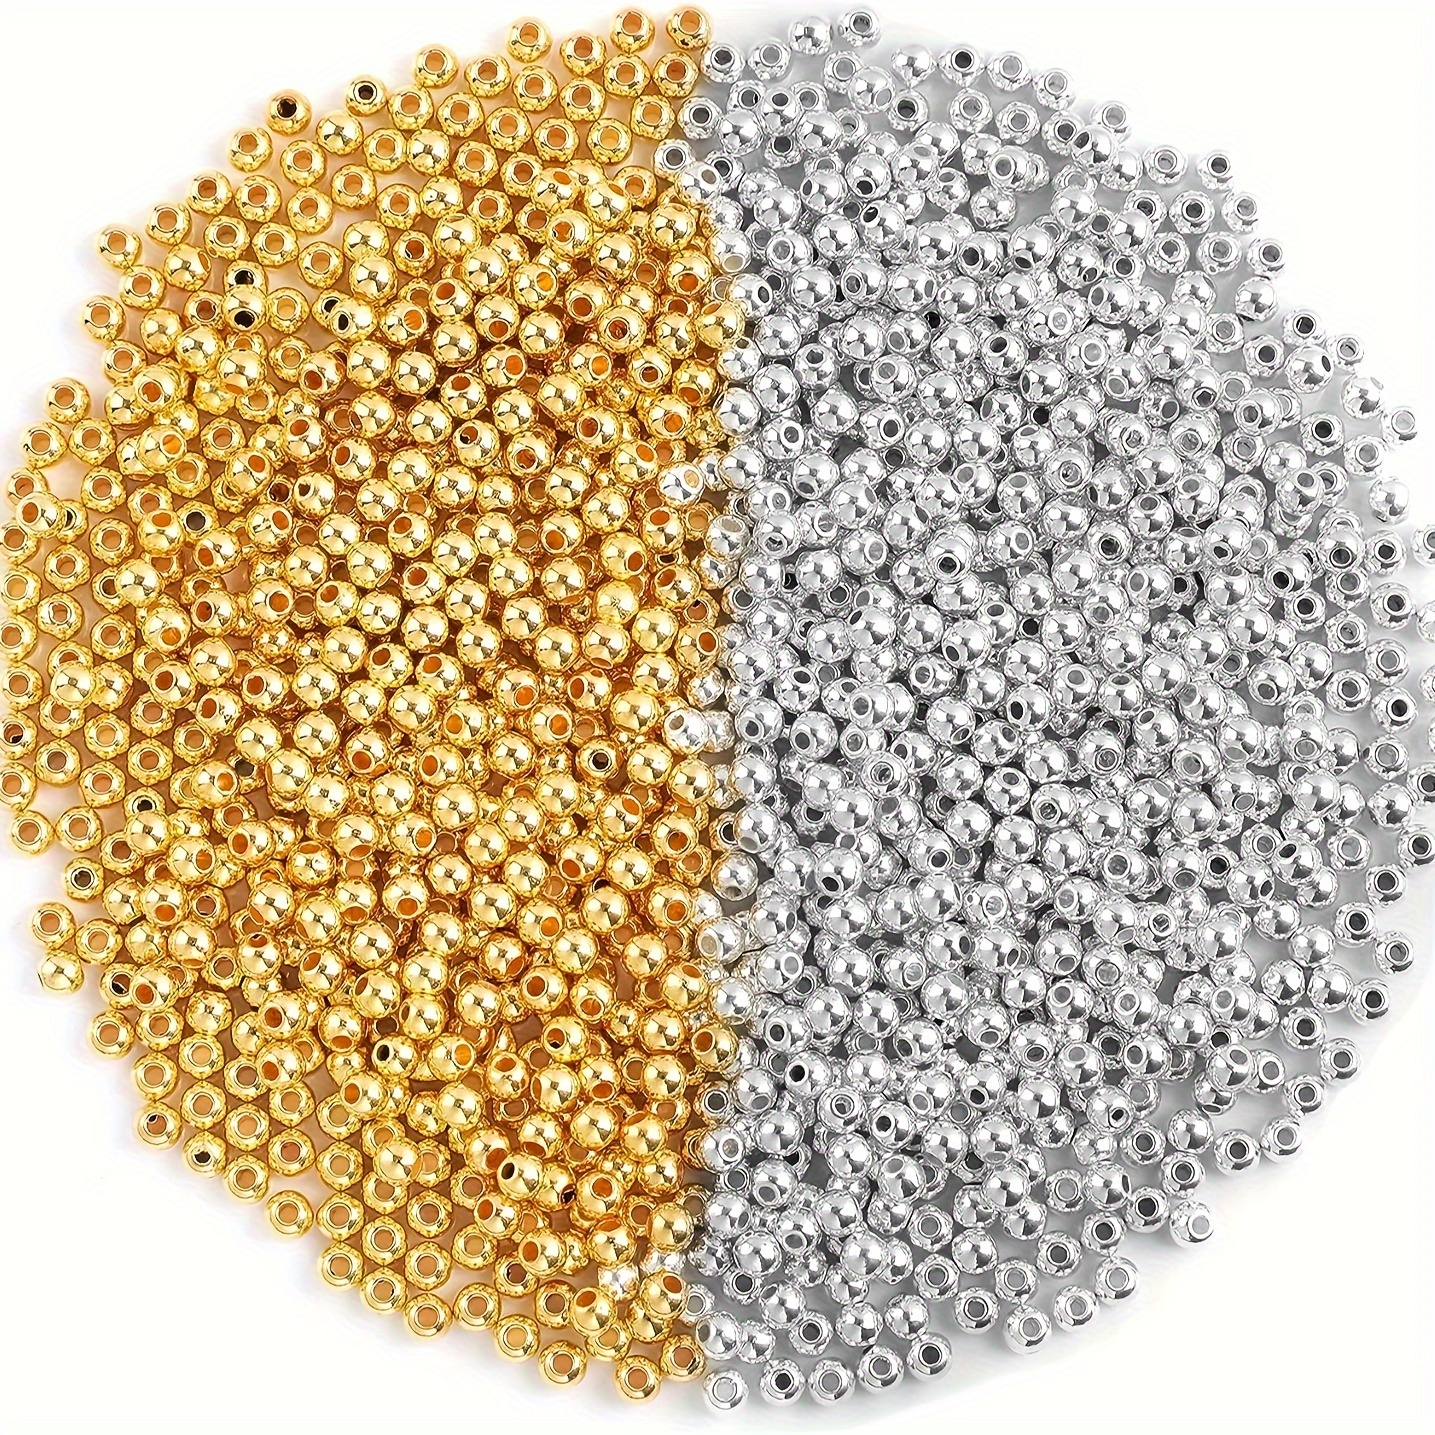 

600pcs 4mm Silvery & Golden Smooth Round Spacer Loose Beads For Jewelry Making Diy Bracelet Necklace Earrings Handicrafts Small Business Supplies